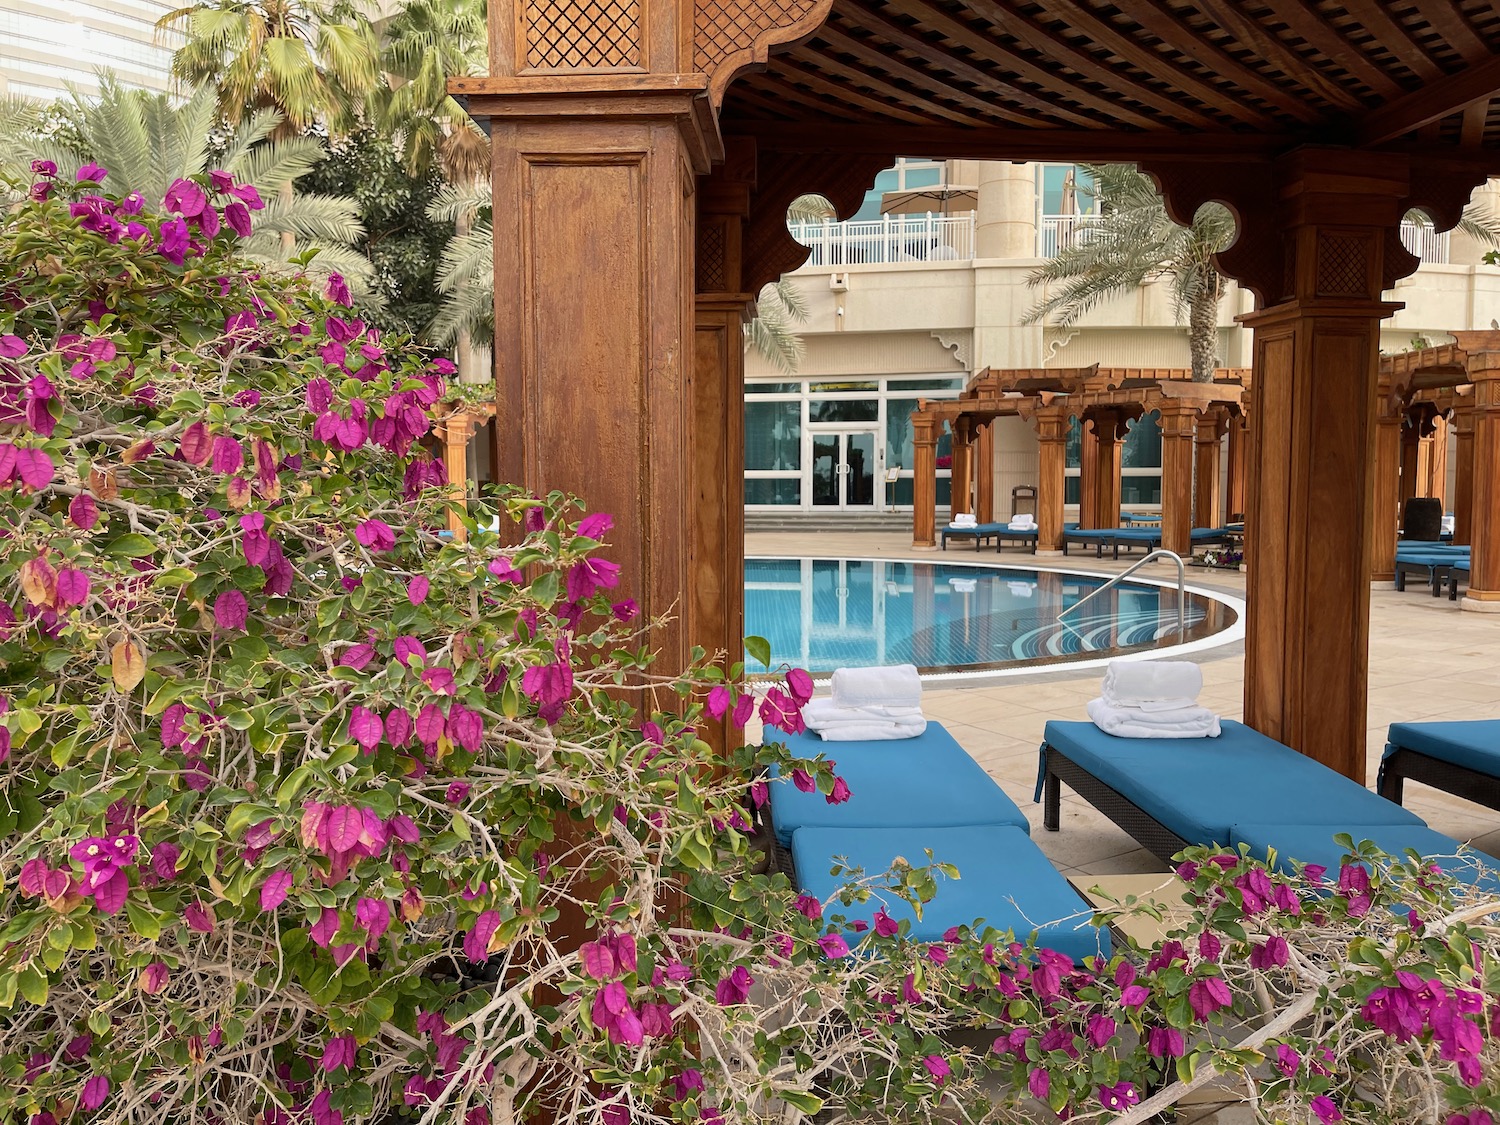 a pool with lounge chairs and purple flowers